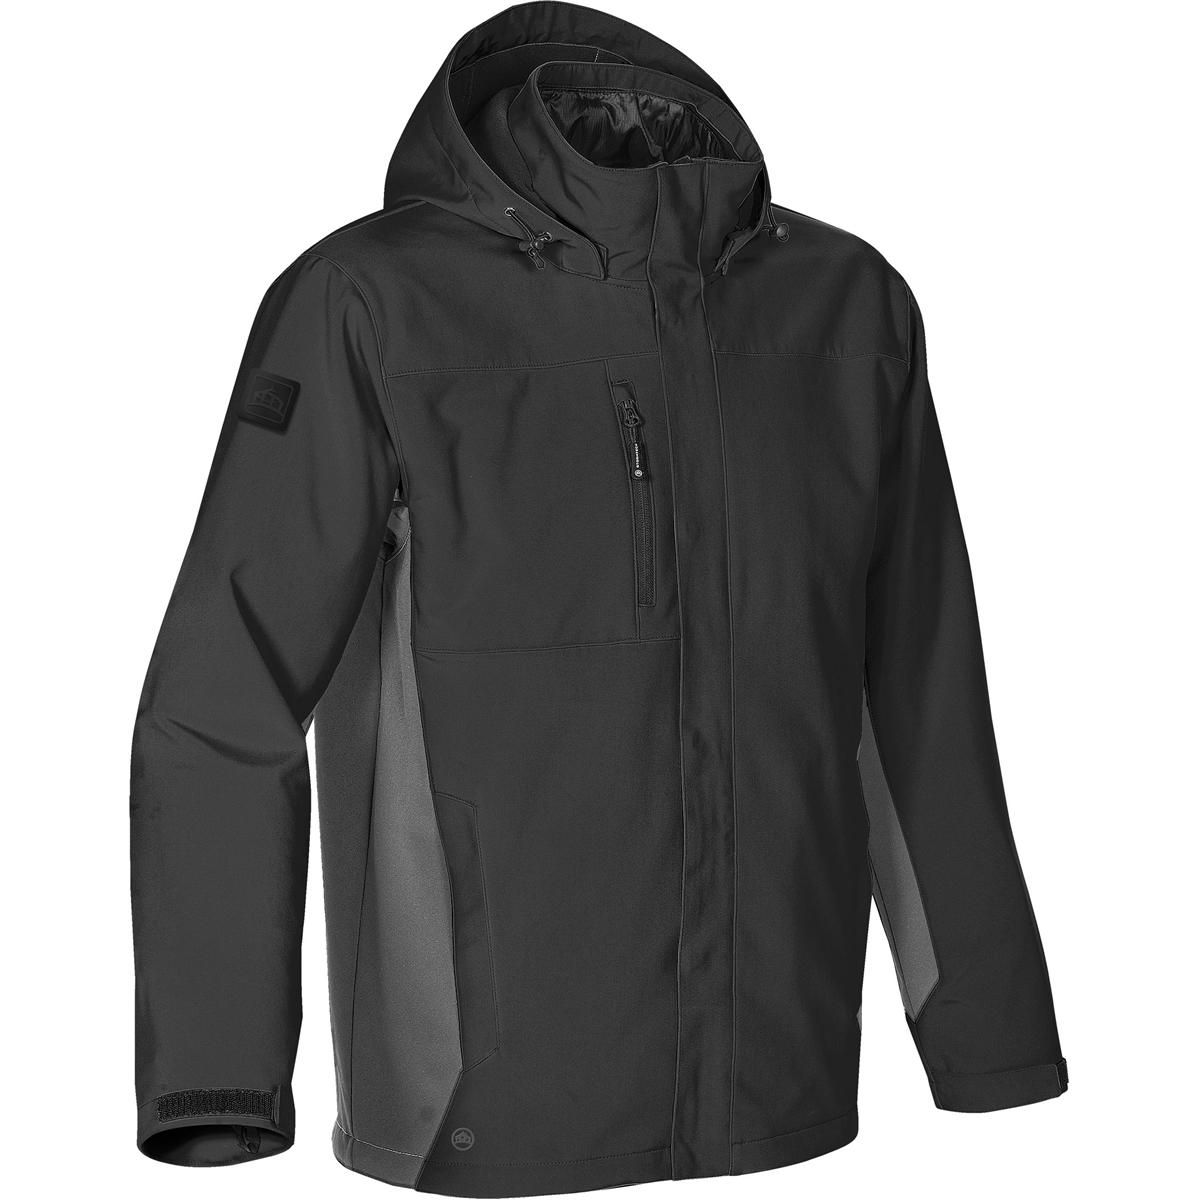 MEN'S ATMOSPHERE 3-IN-1 SYSTEM JACKET - Boost Promotions